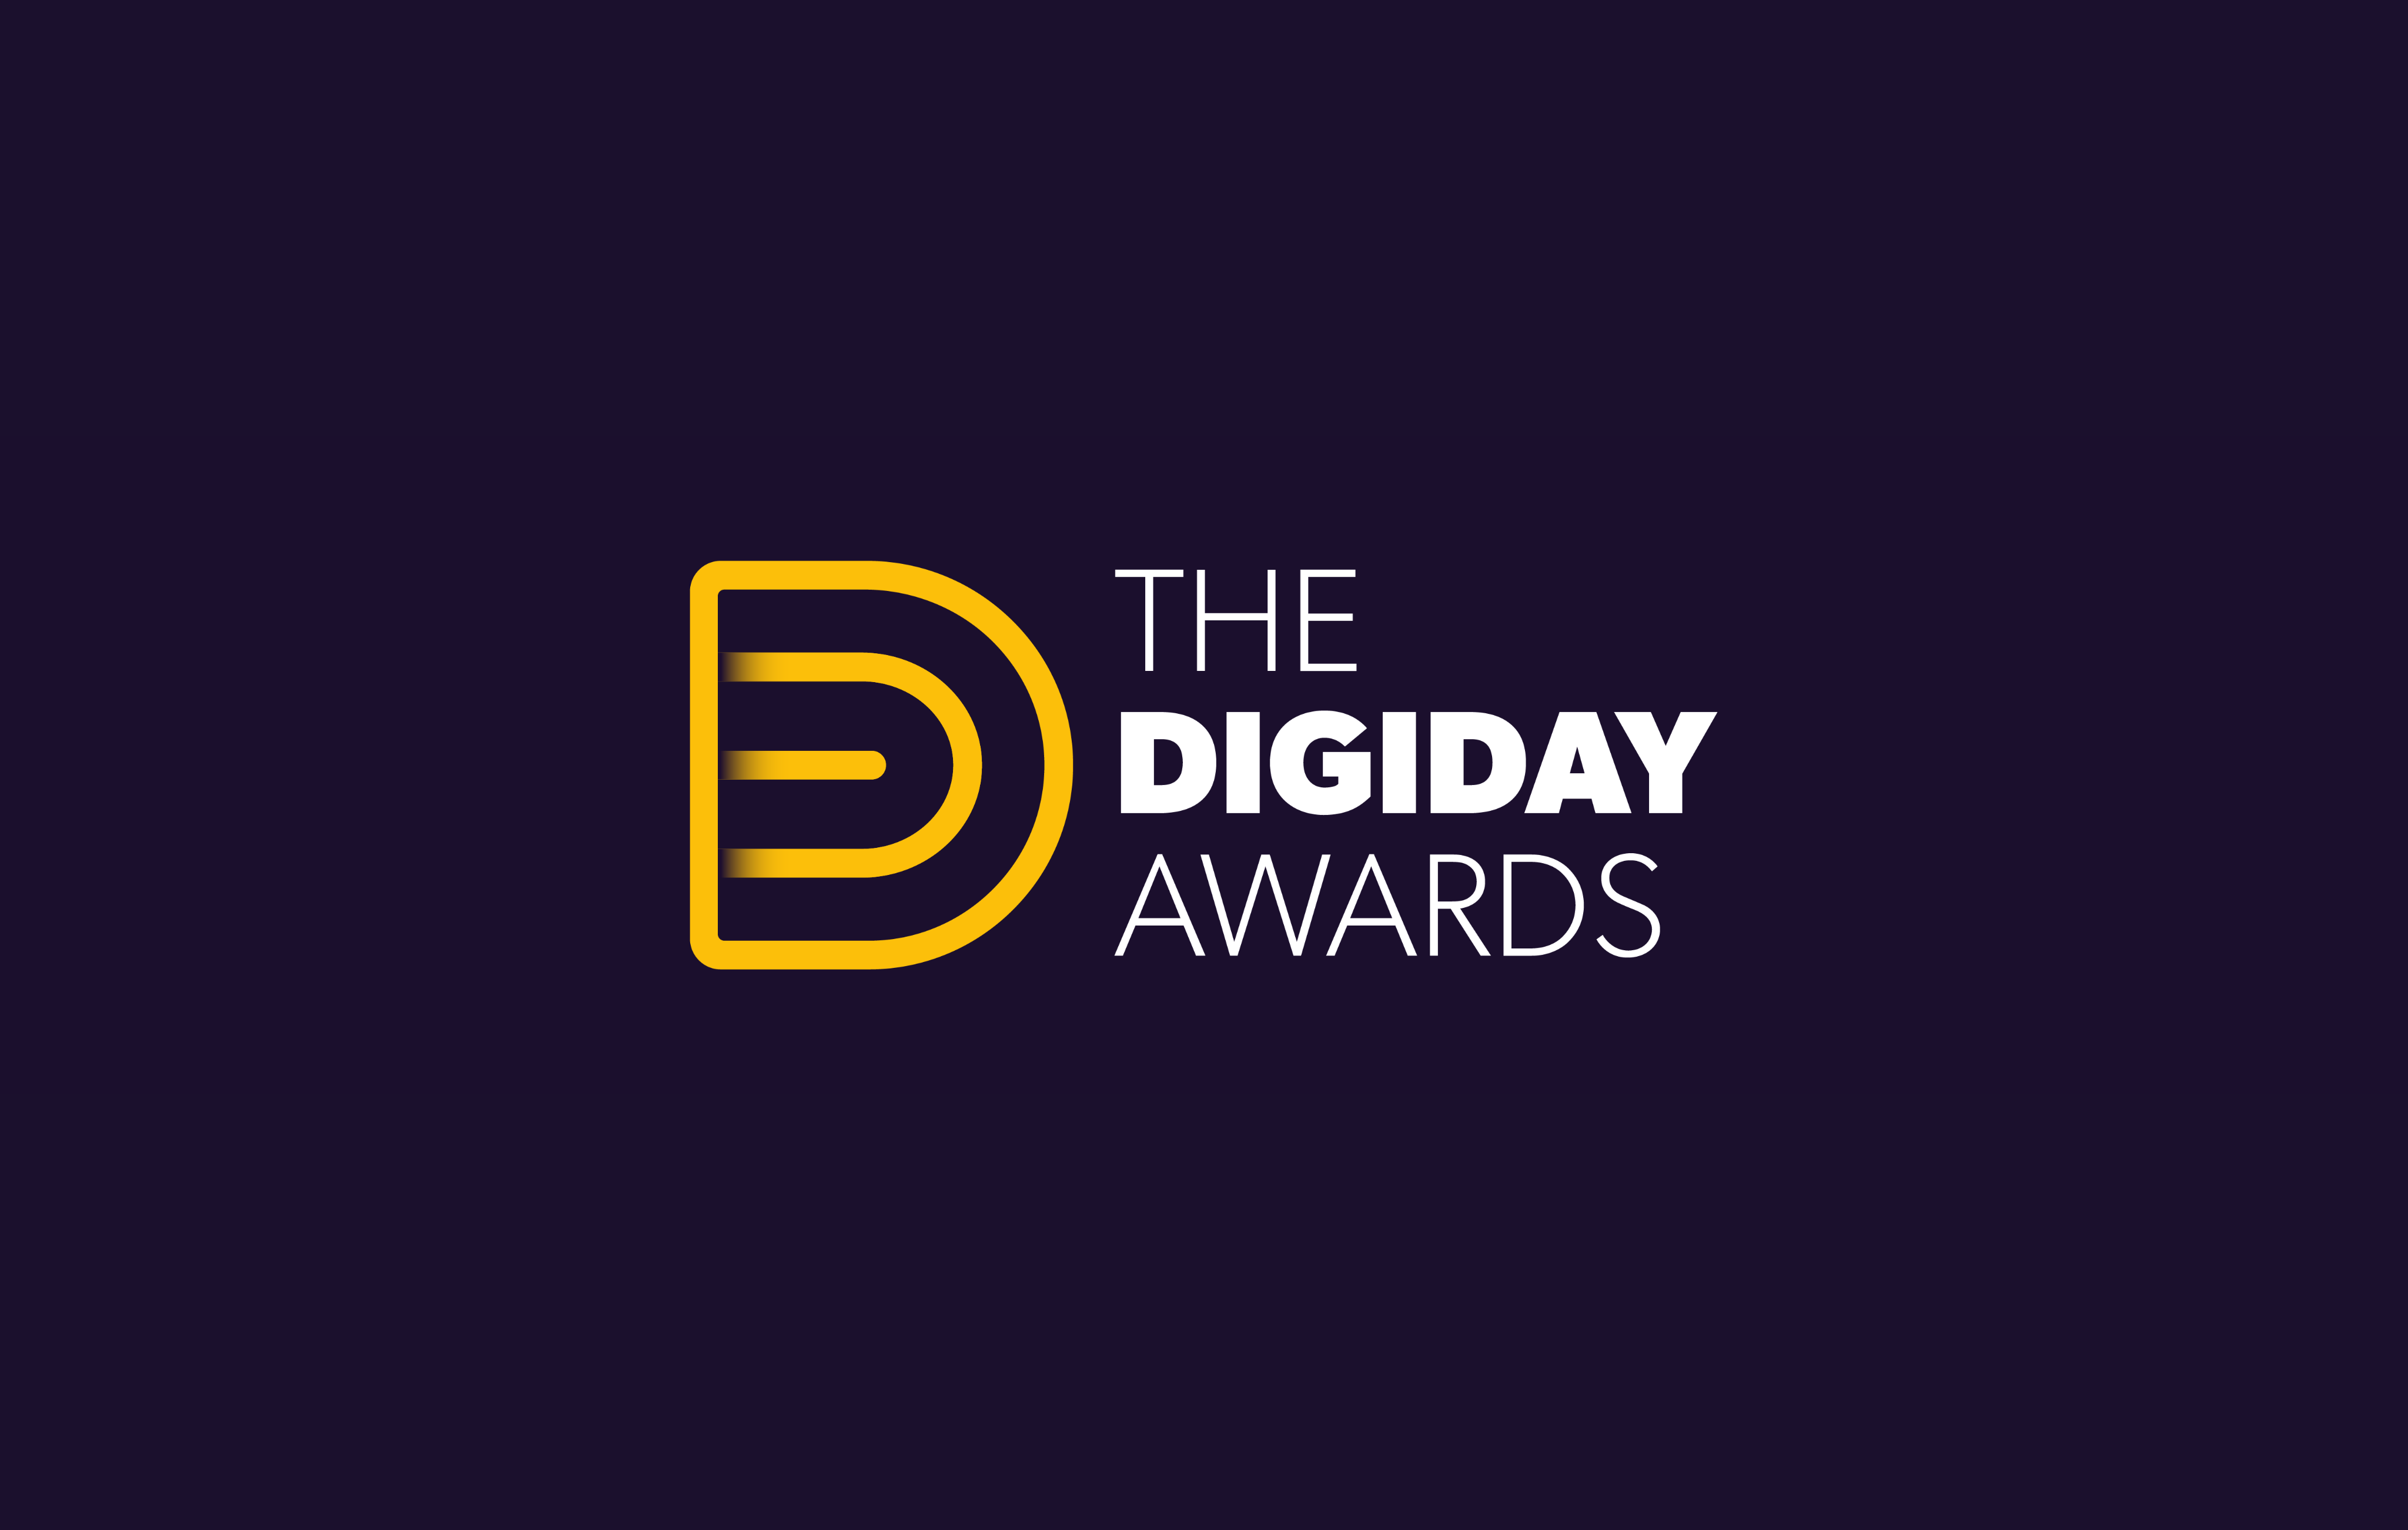 Coca-Cola, Edelman and Tropicana are winners of the 2022 Digiday Awards